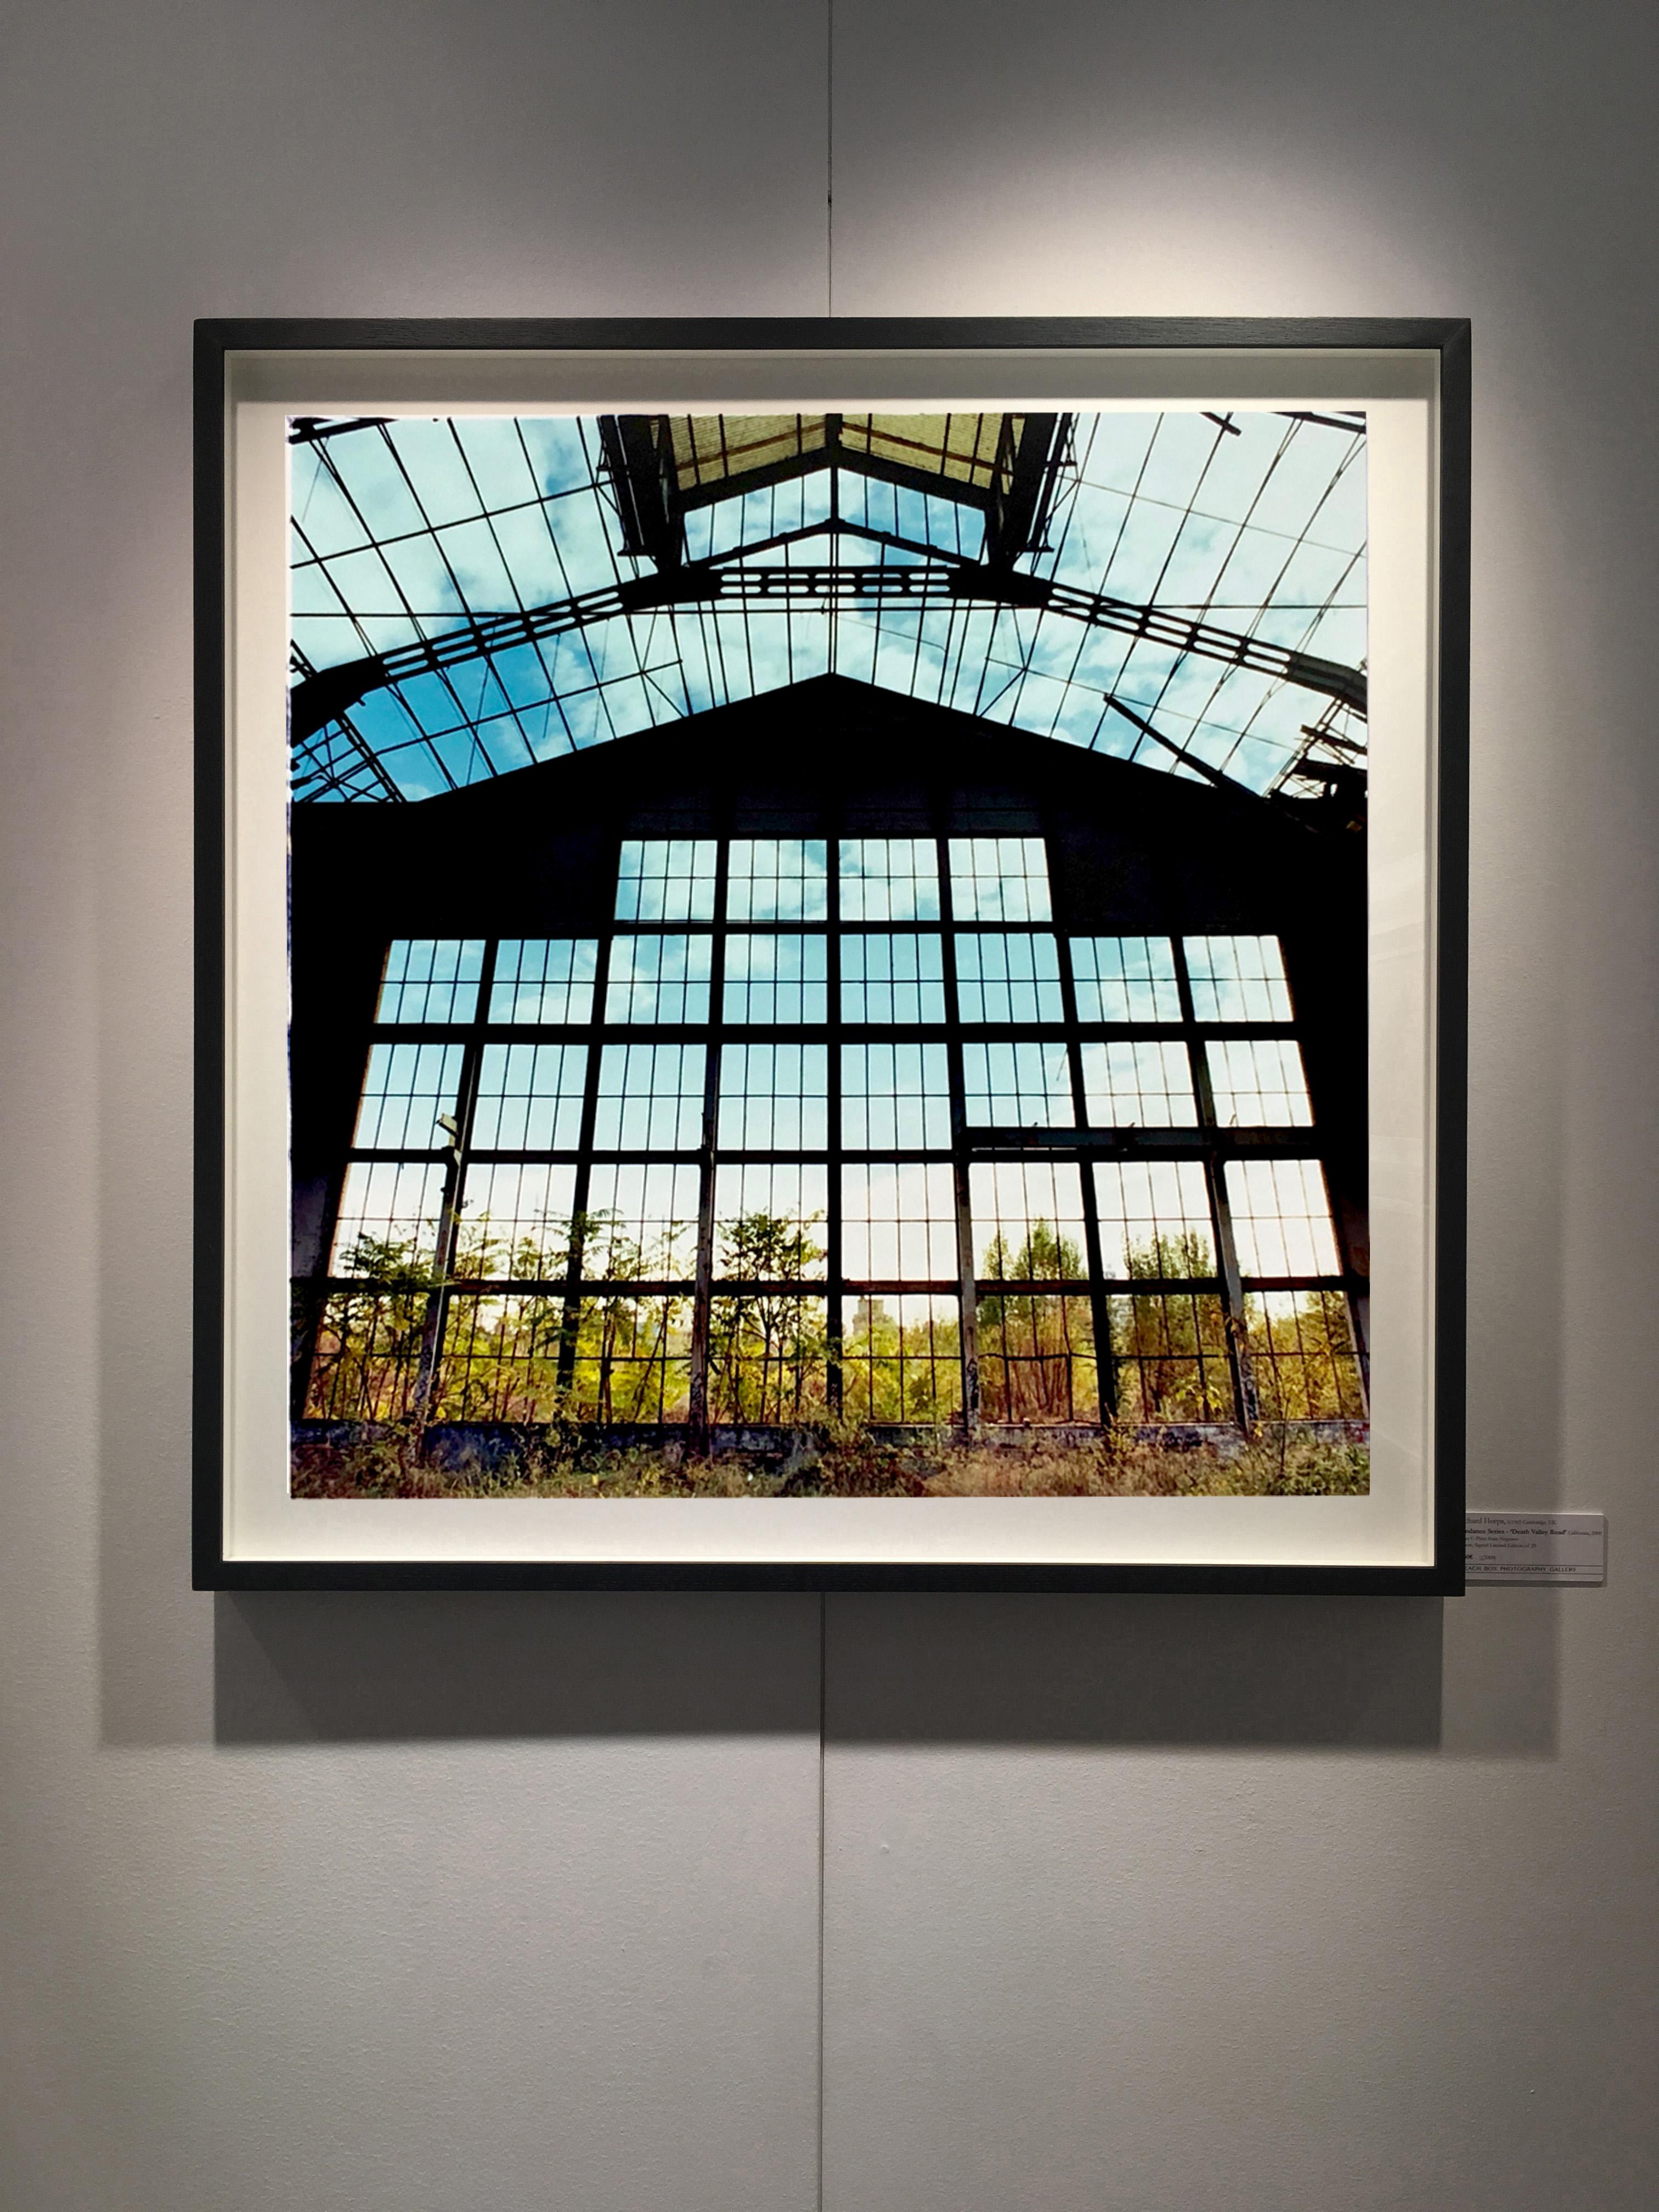 Big Window, Lambrate, Milan - Industrial architecture Italian color photography - Print by Richard Heeps